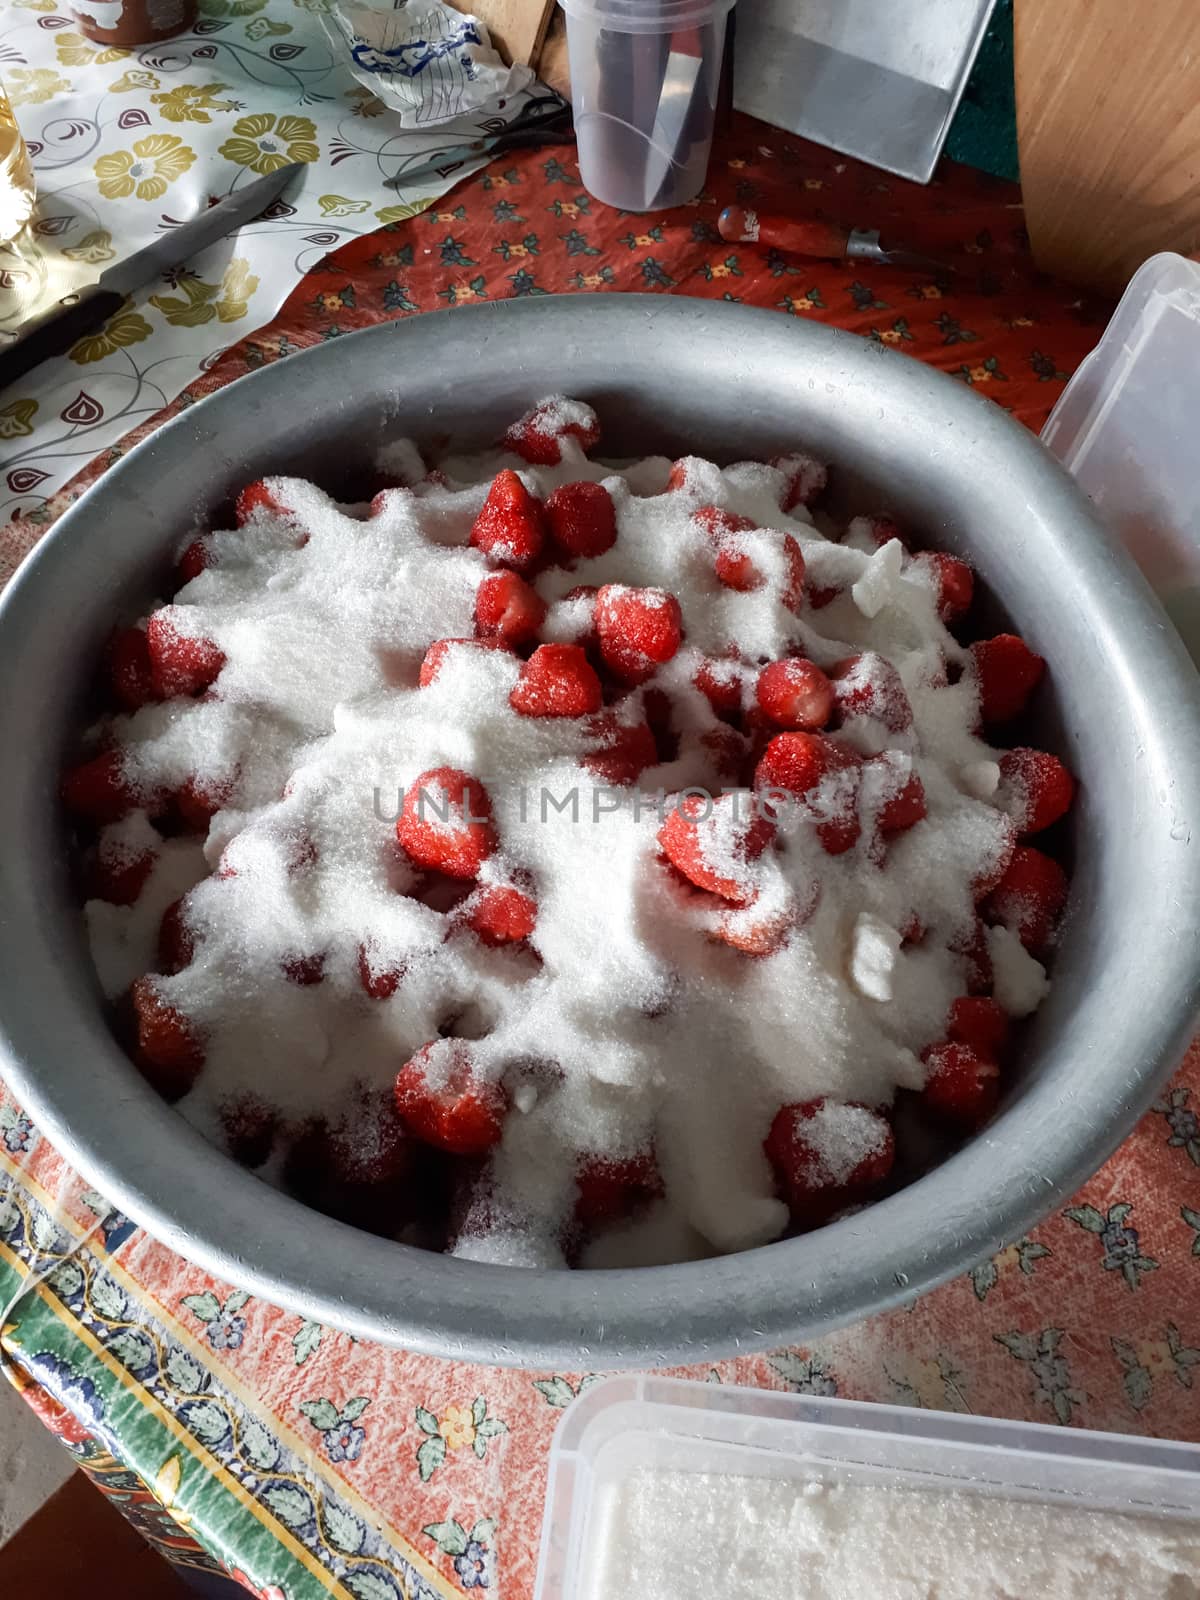 Strawberry berries with sugar in a basin. Harvesting berries for cooking.